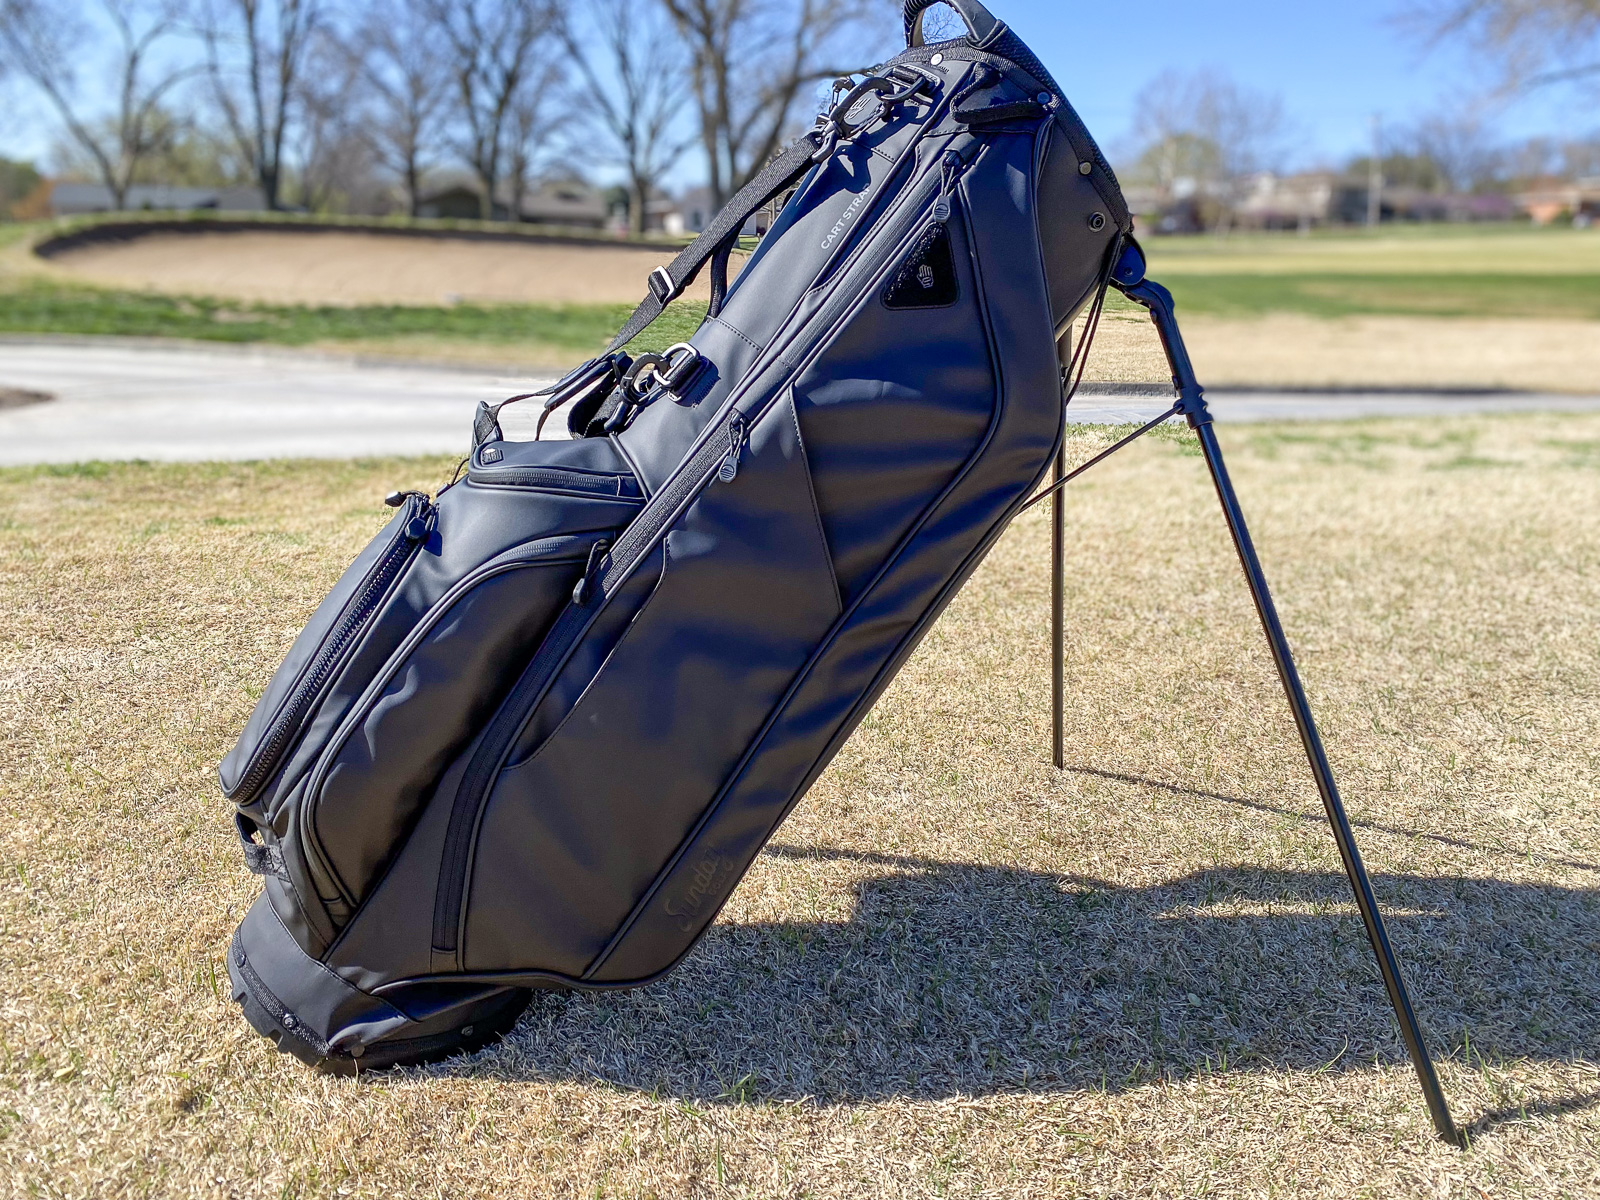 Sunday Golf Ryder-S Bag - Use Code "BE15" to save 15%